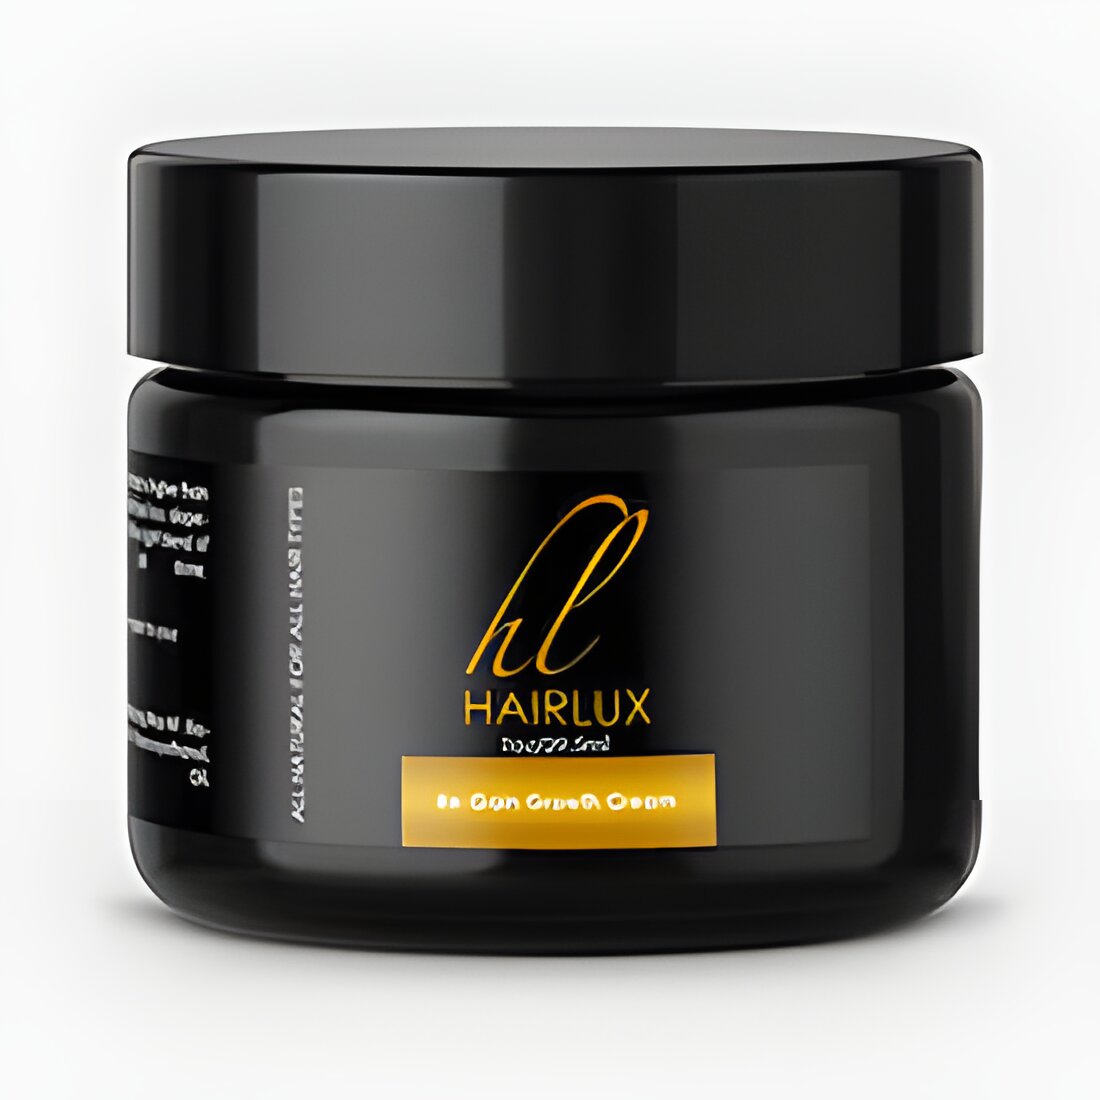 Free HairLux Hair Treatment Product Sample